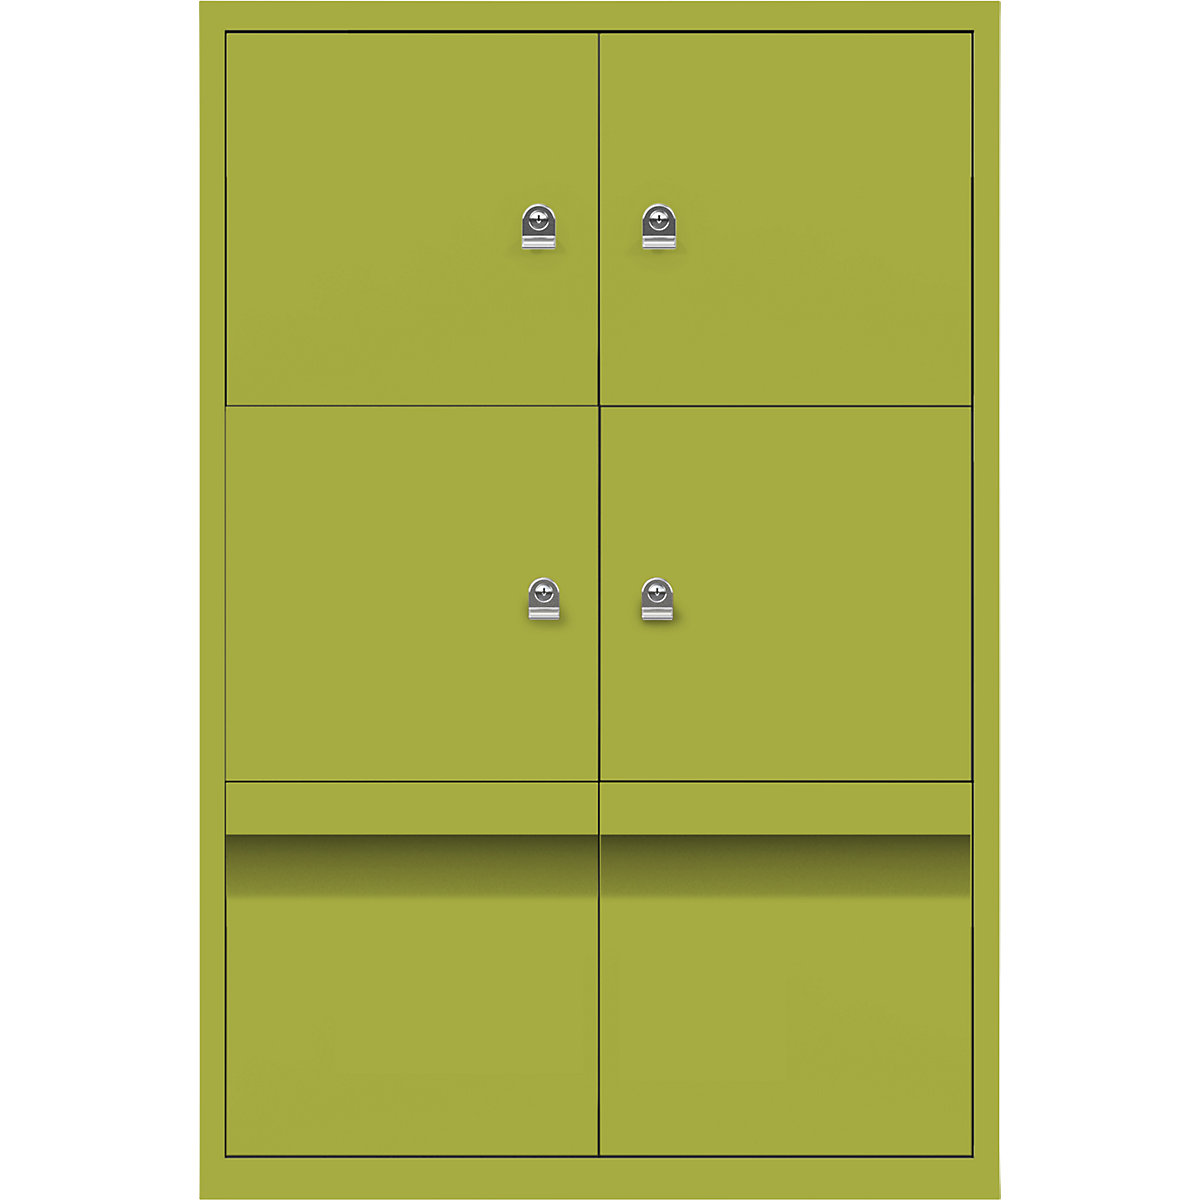 LateralFile™ lodge – BISLEY, with 4 lockable compartments and 2 drawers, height 375 mm each, green-16